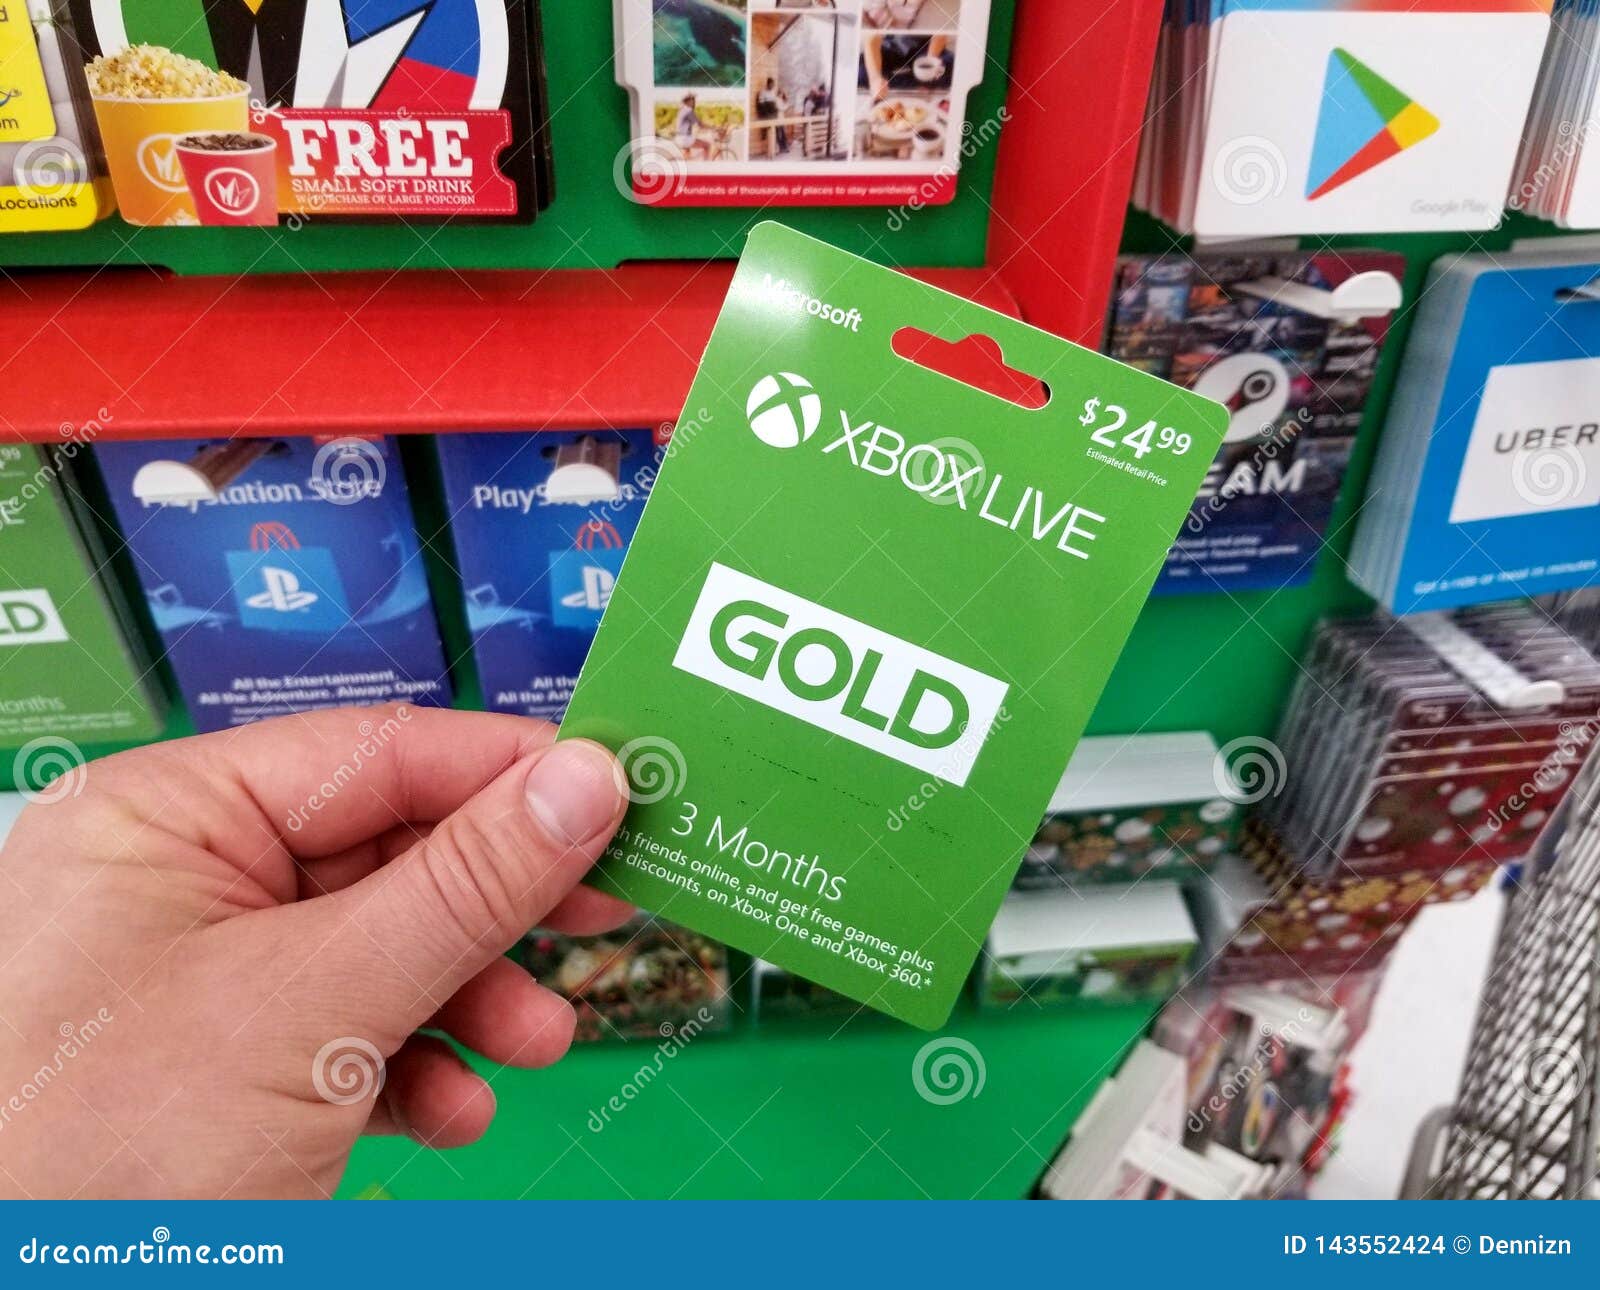 Xbox Gift Card In A Hand Editorial Stock Image Image Of Decoration 143552424